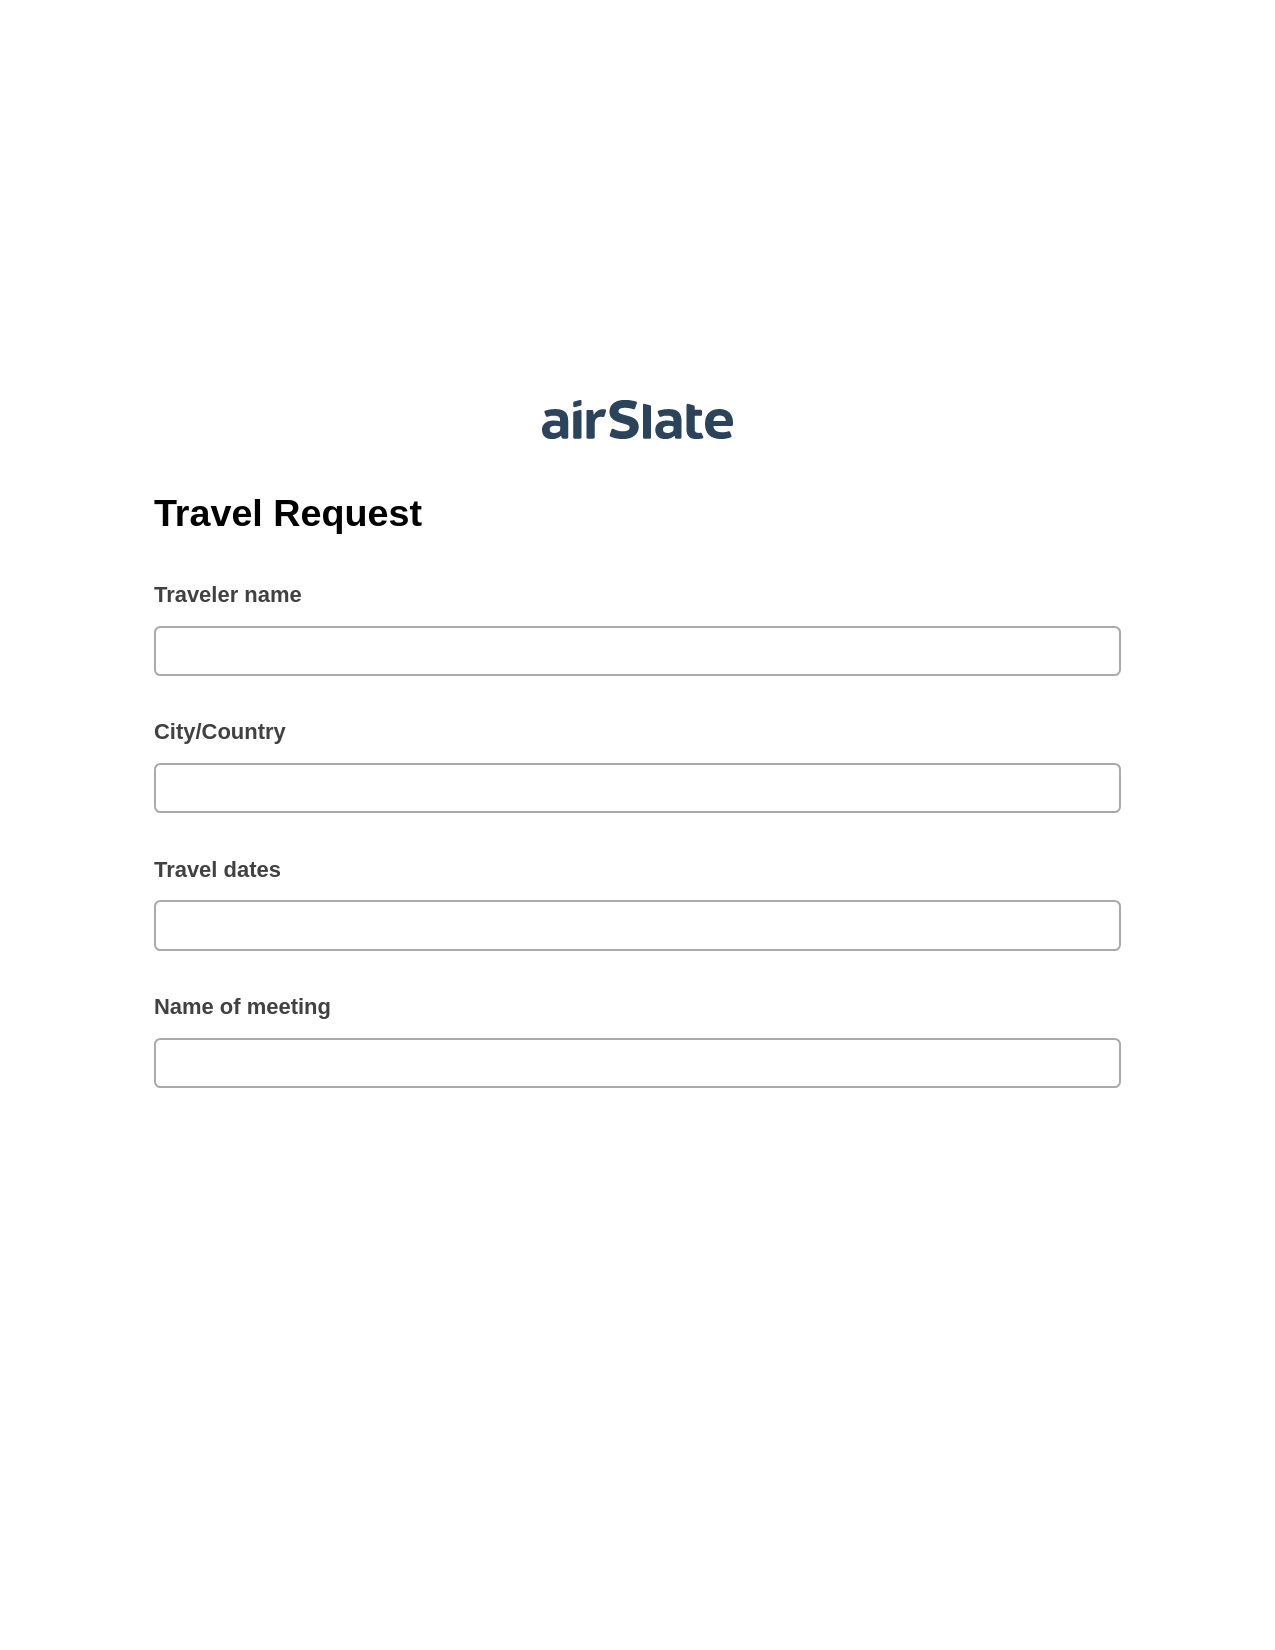 Multirole Travel Request Pre-fill from CSV File Bot, Remove Slate Bot, Export to Excel 365 Bot